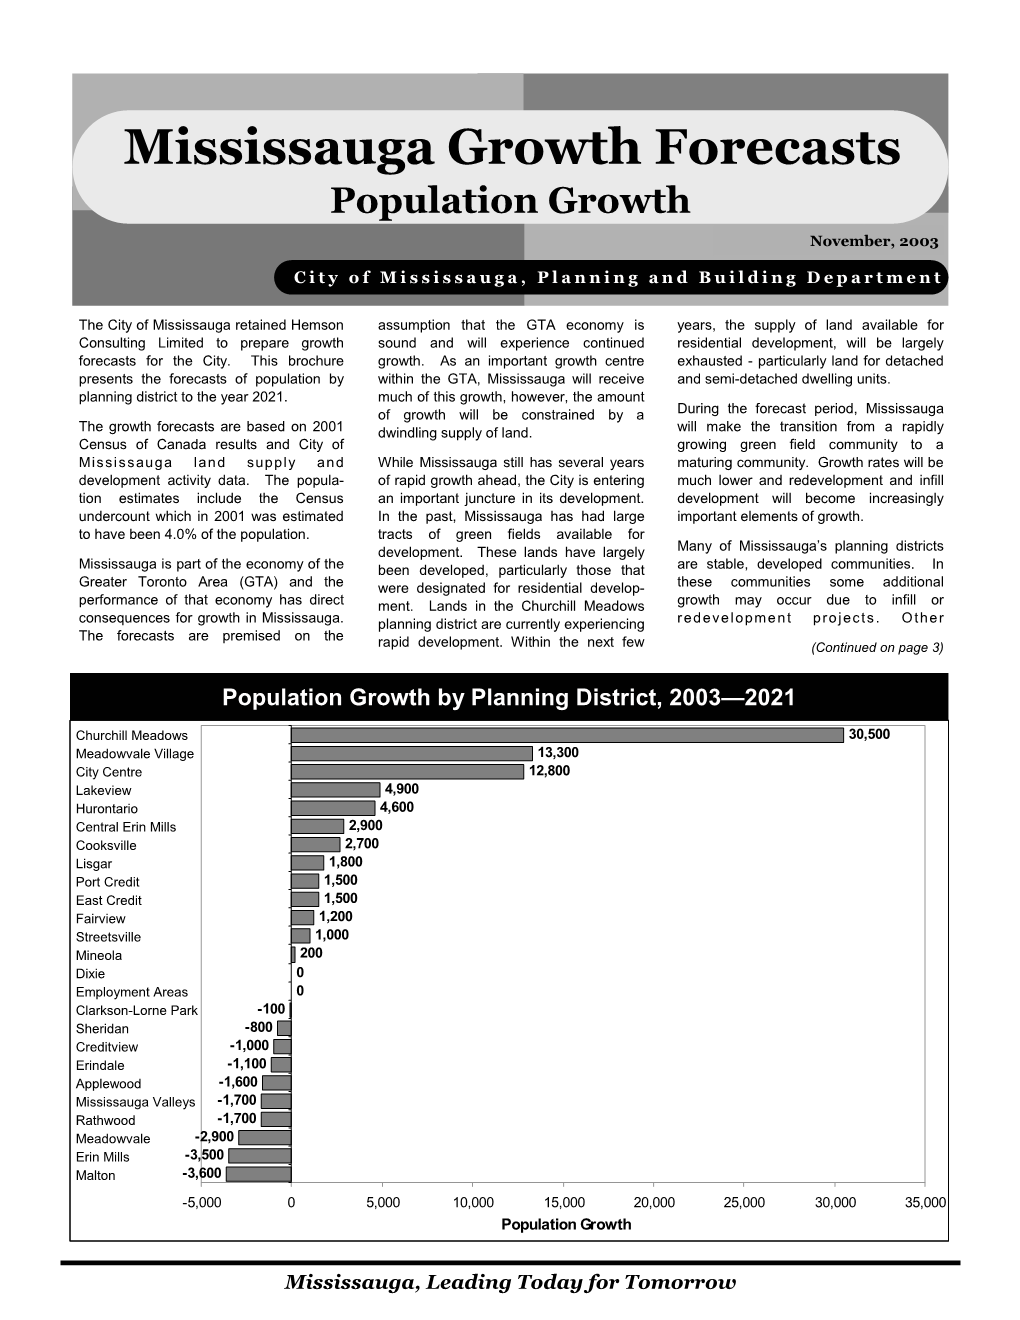 Mississauga Growth Forecasts Population Growth November, 2003